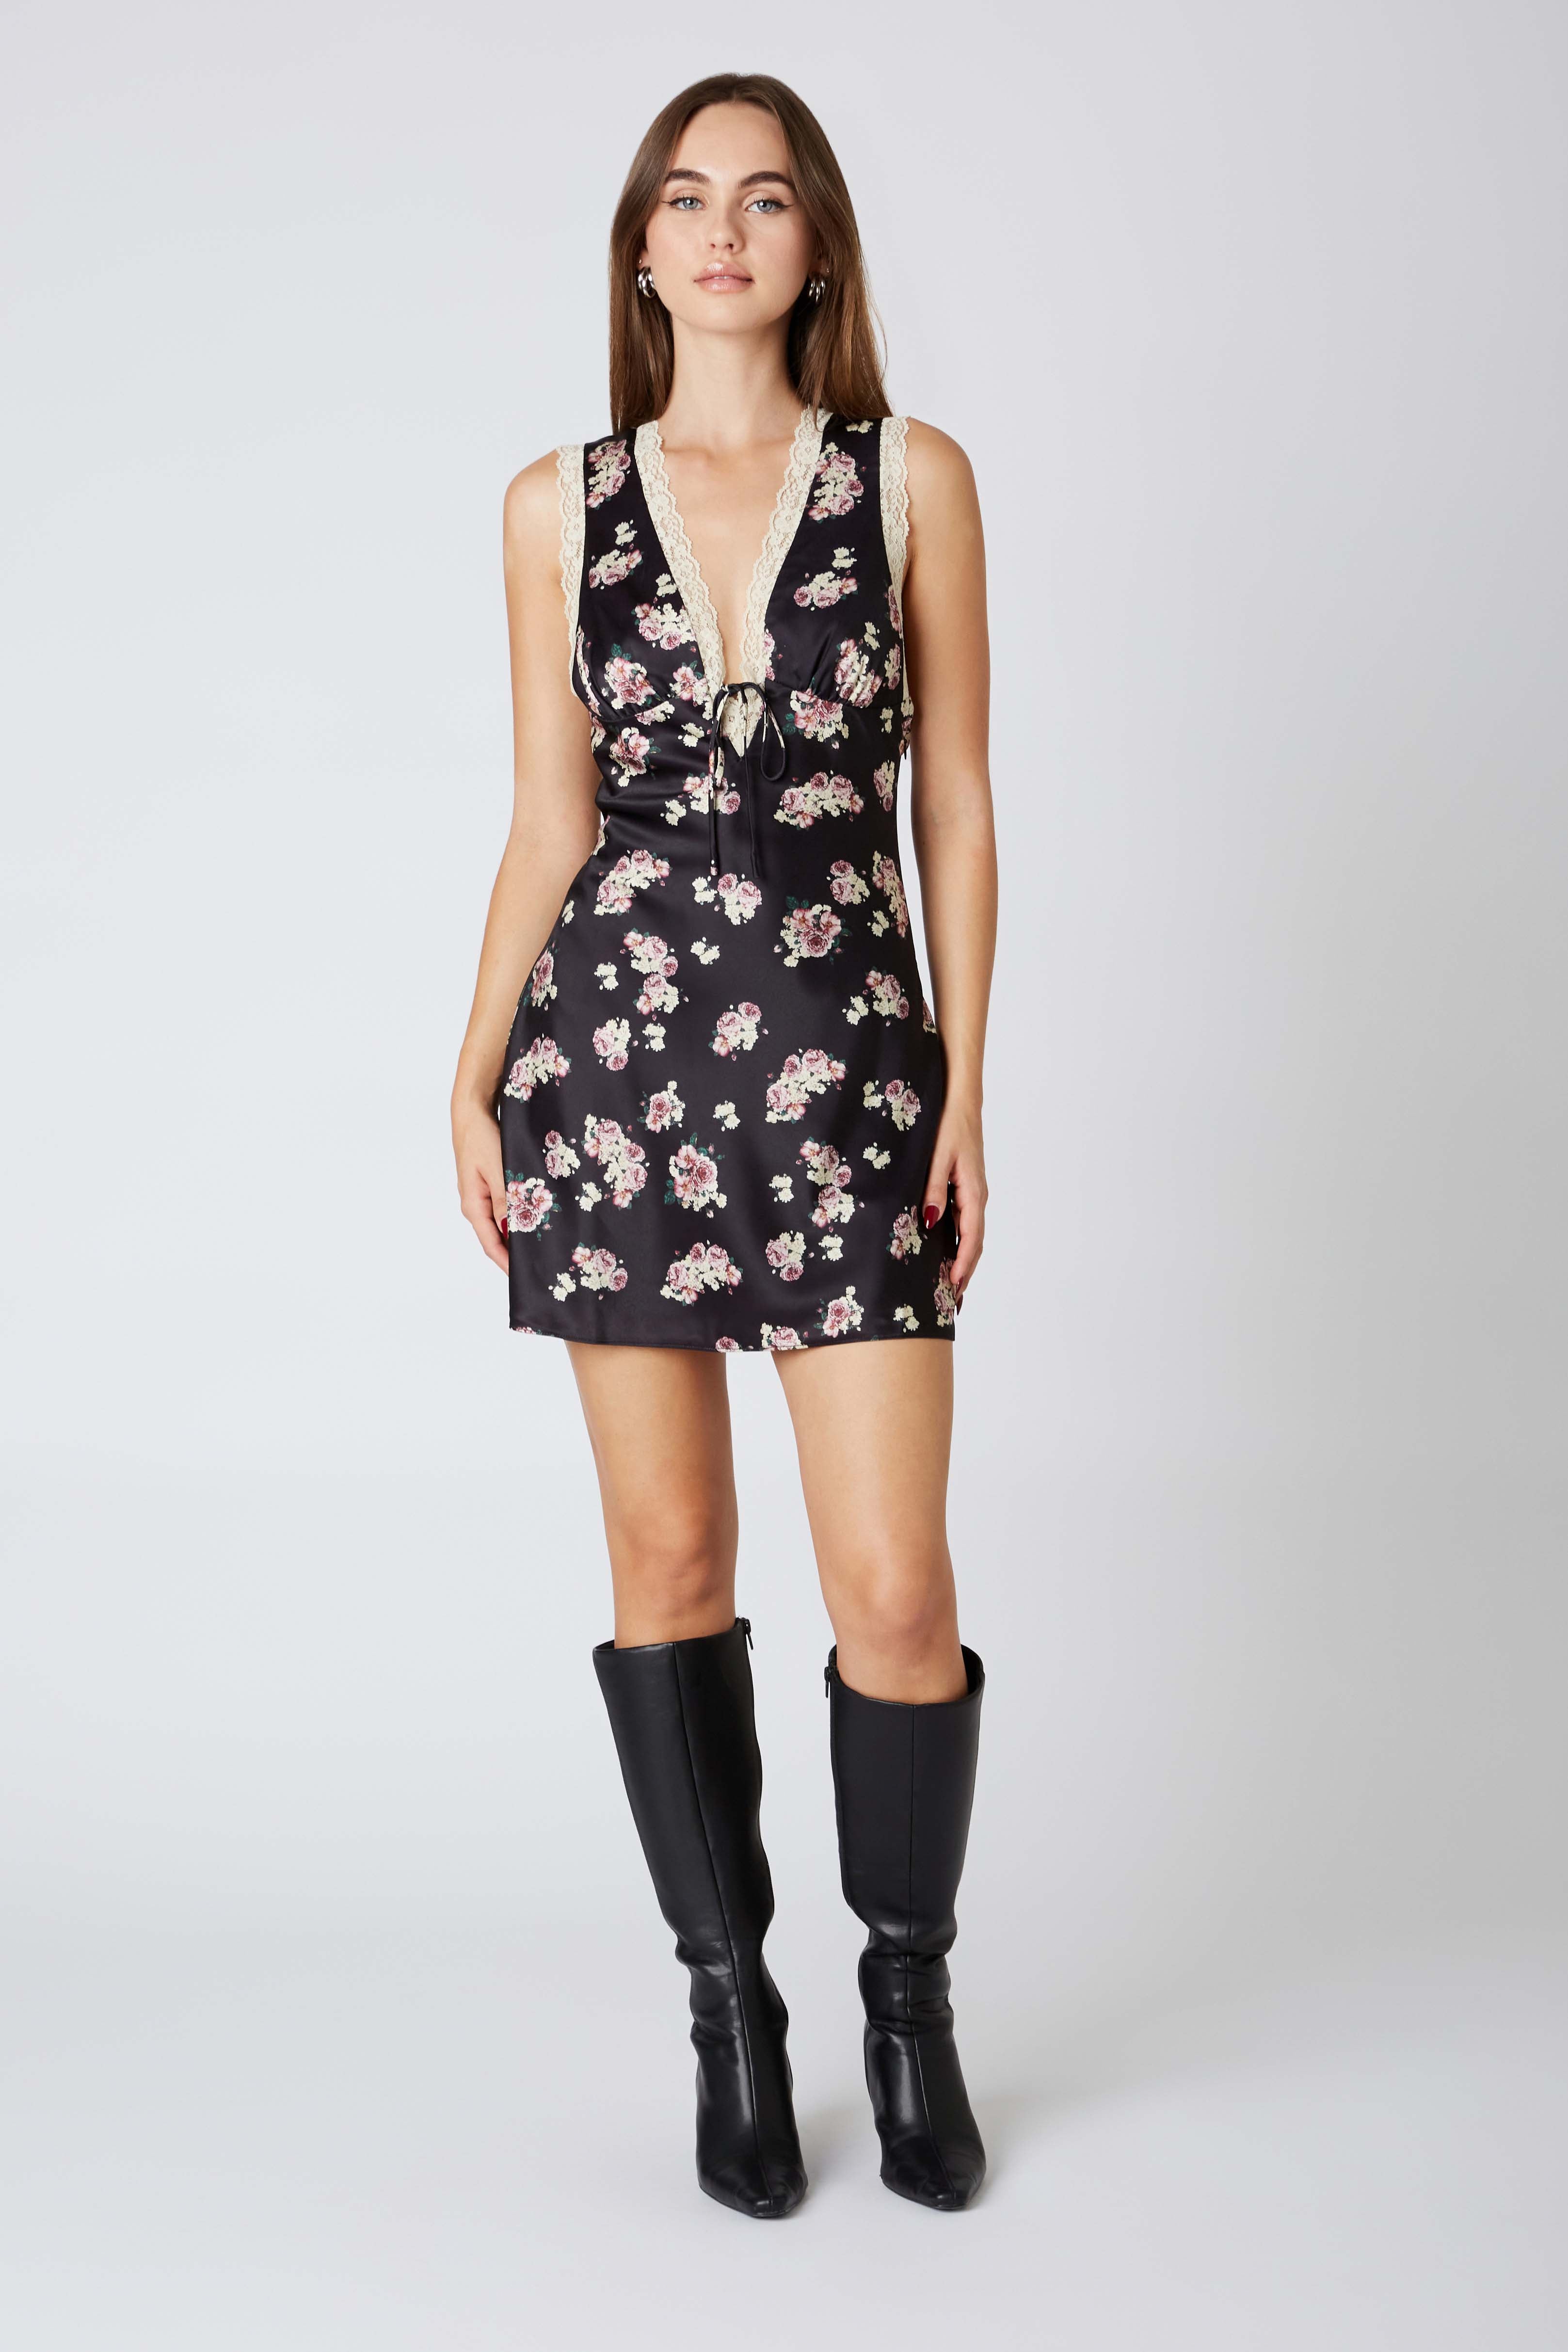 Floral Mini Dress in Black Front View